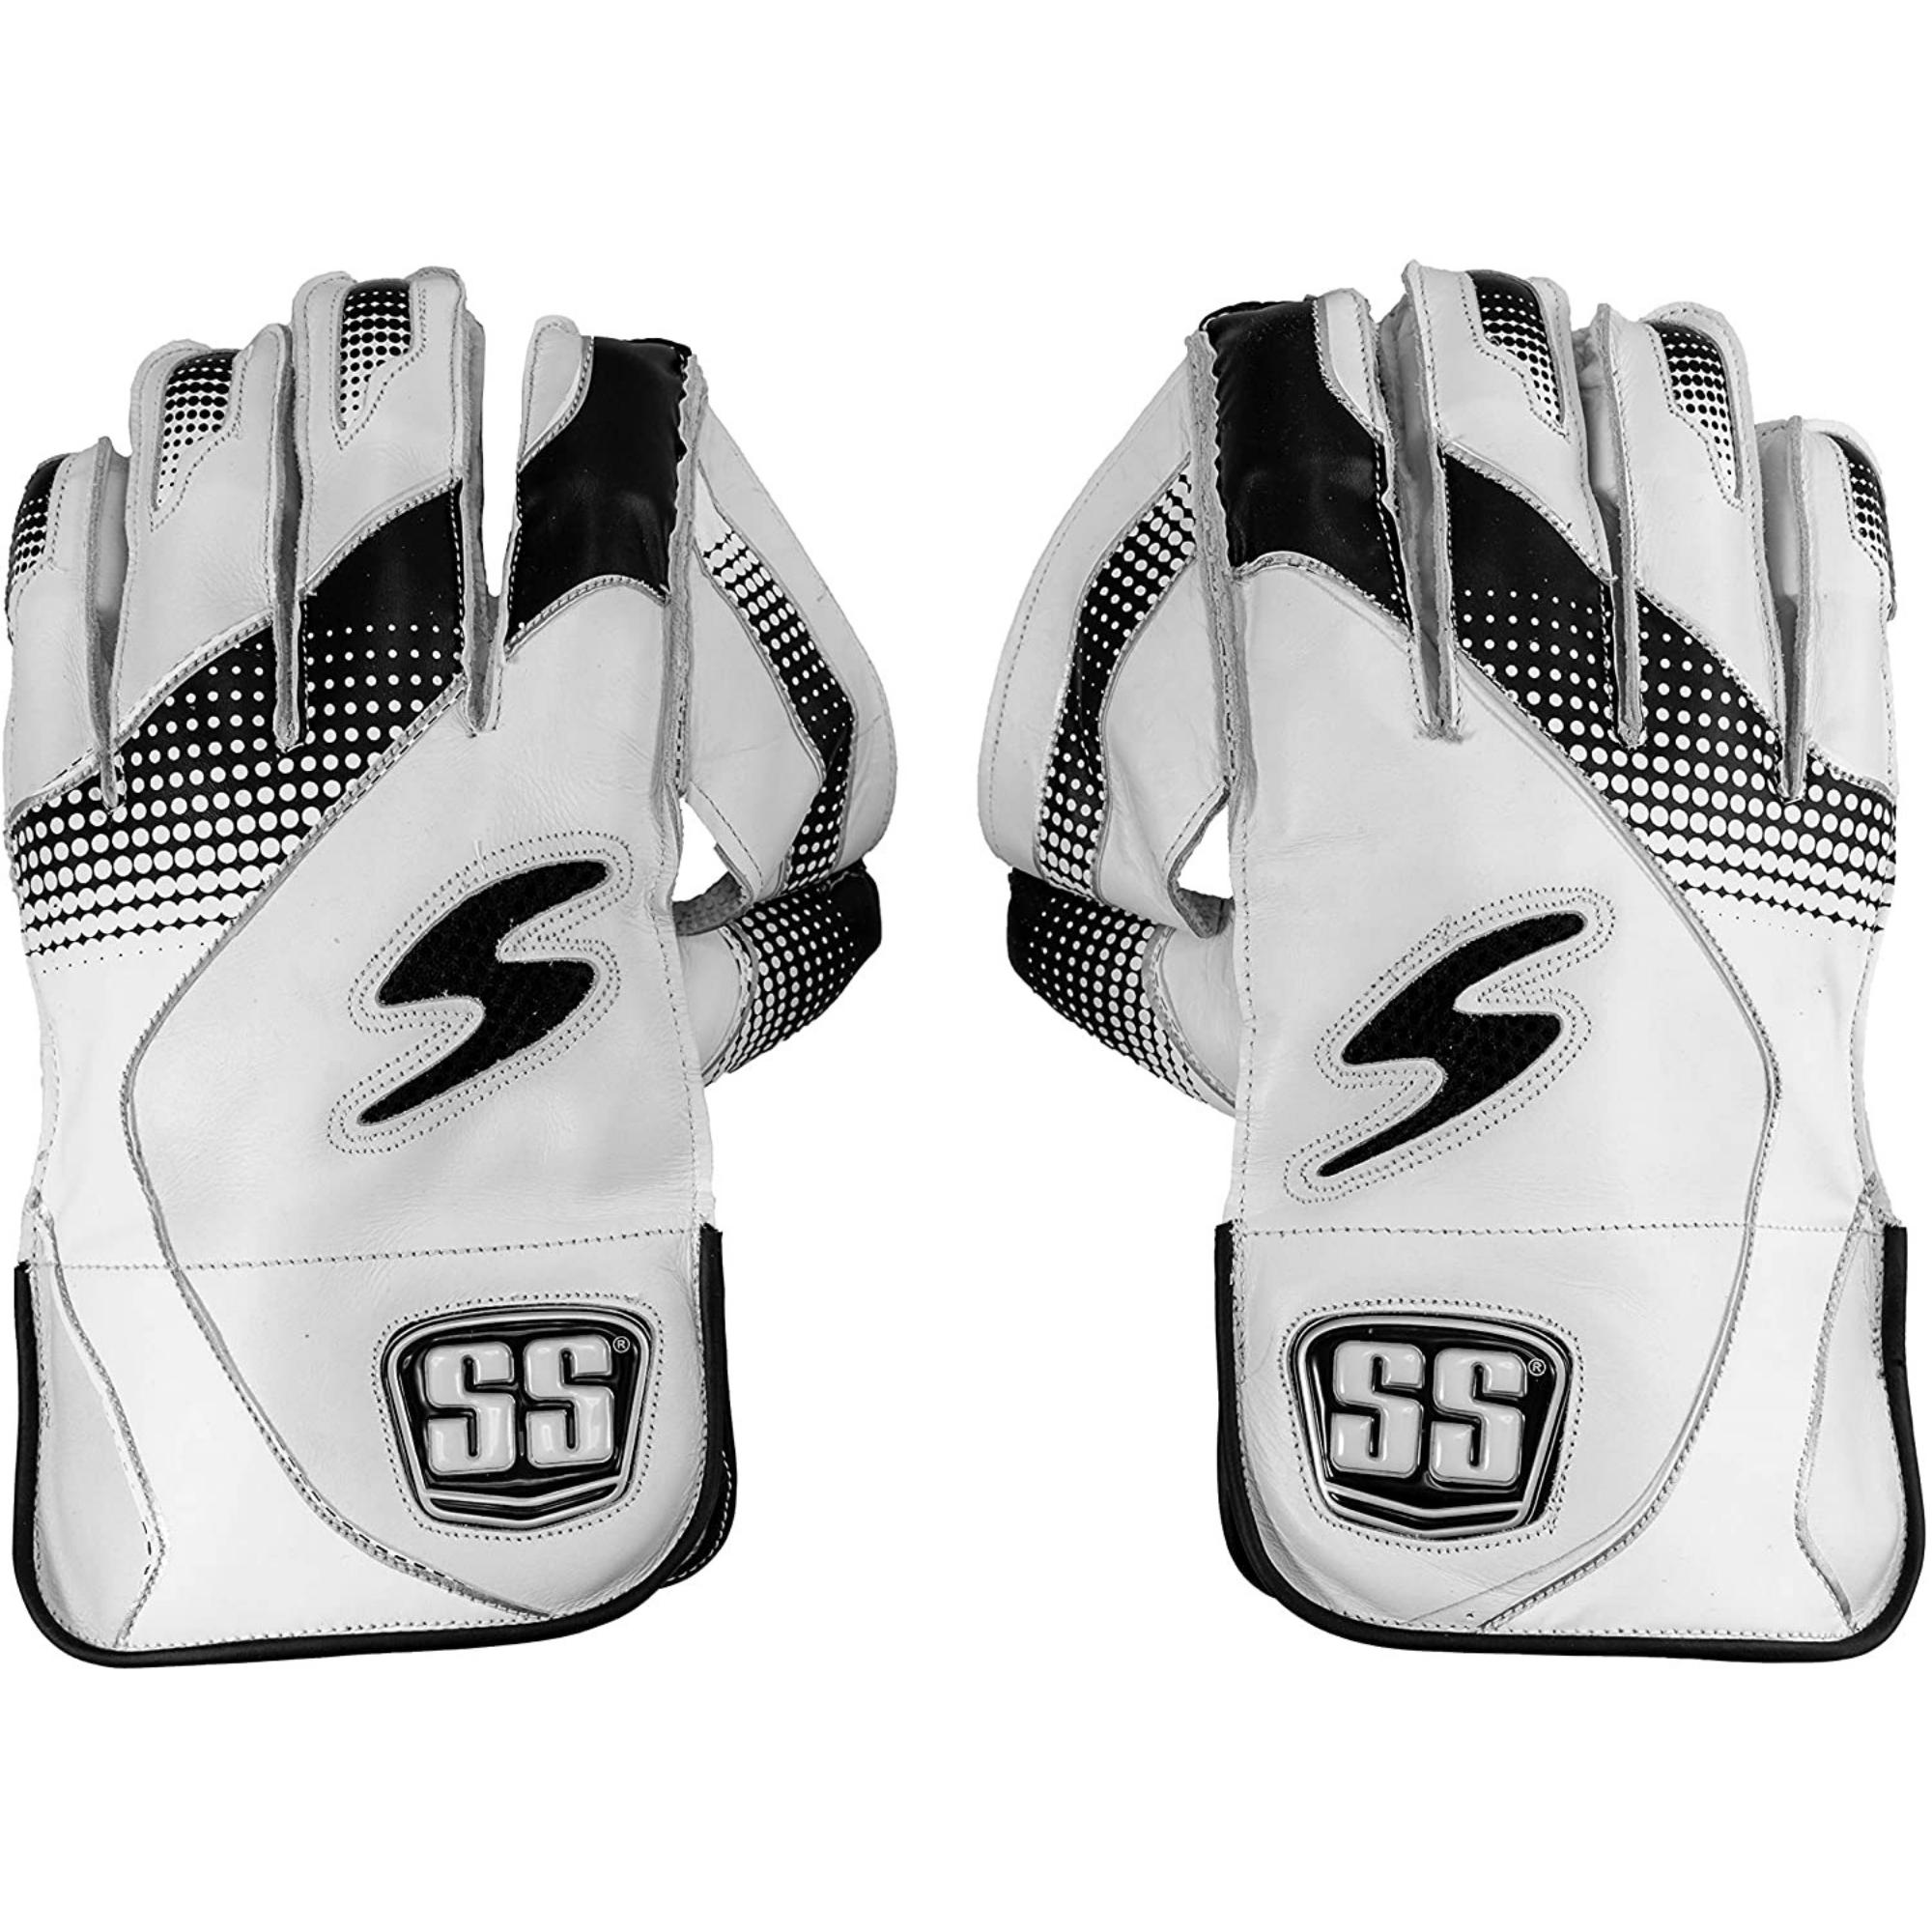 SS Match Cricket Wicket Keeping Gloves and Cotton Inner Gloves